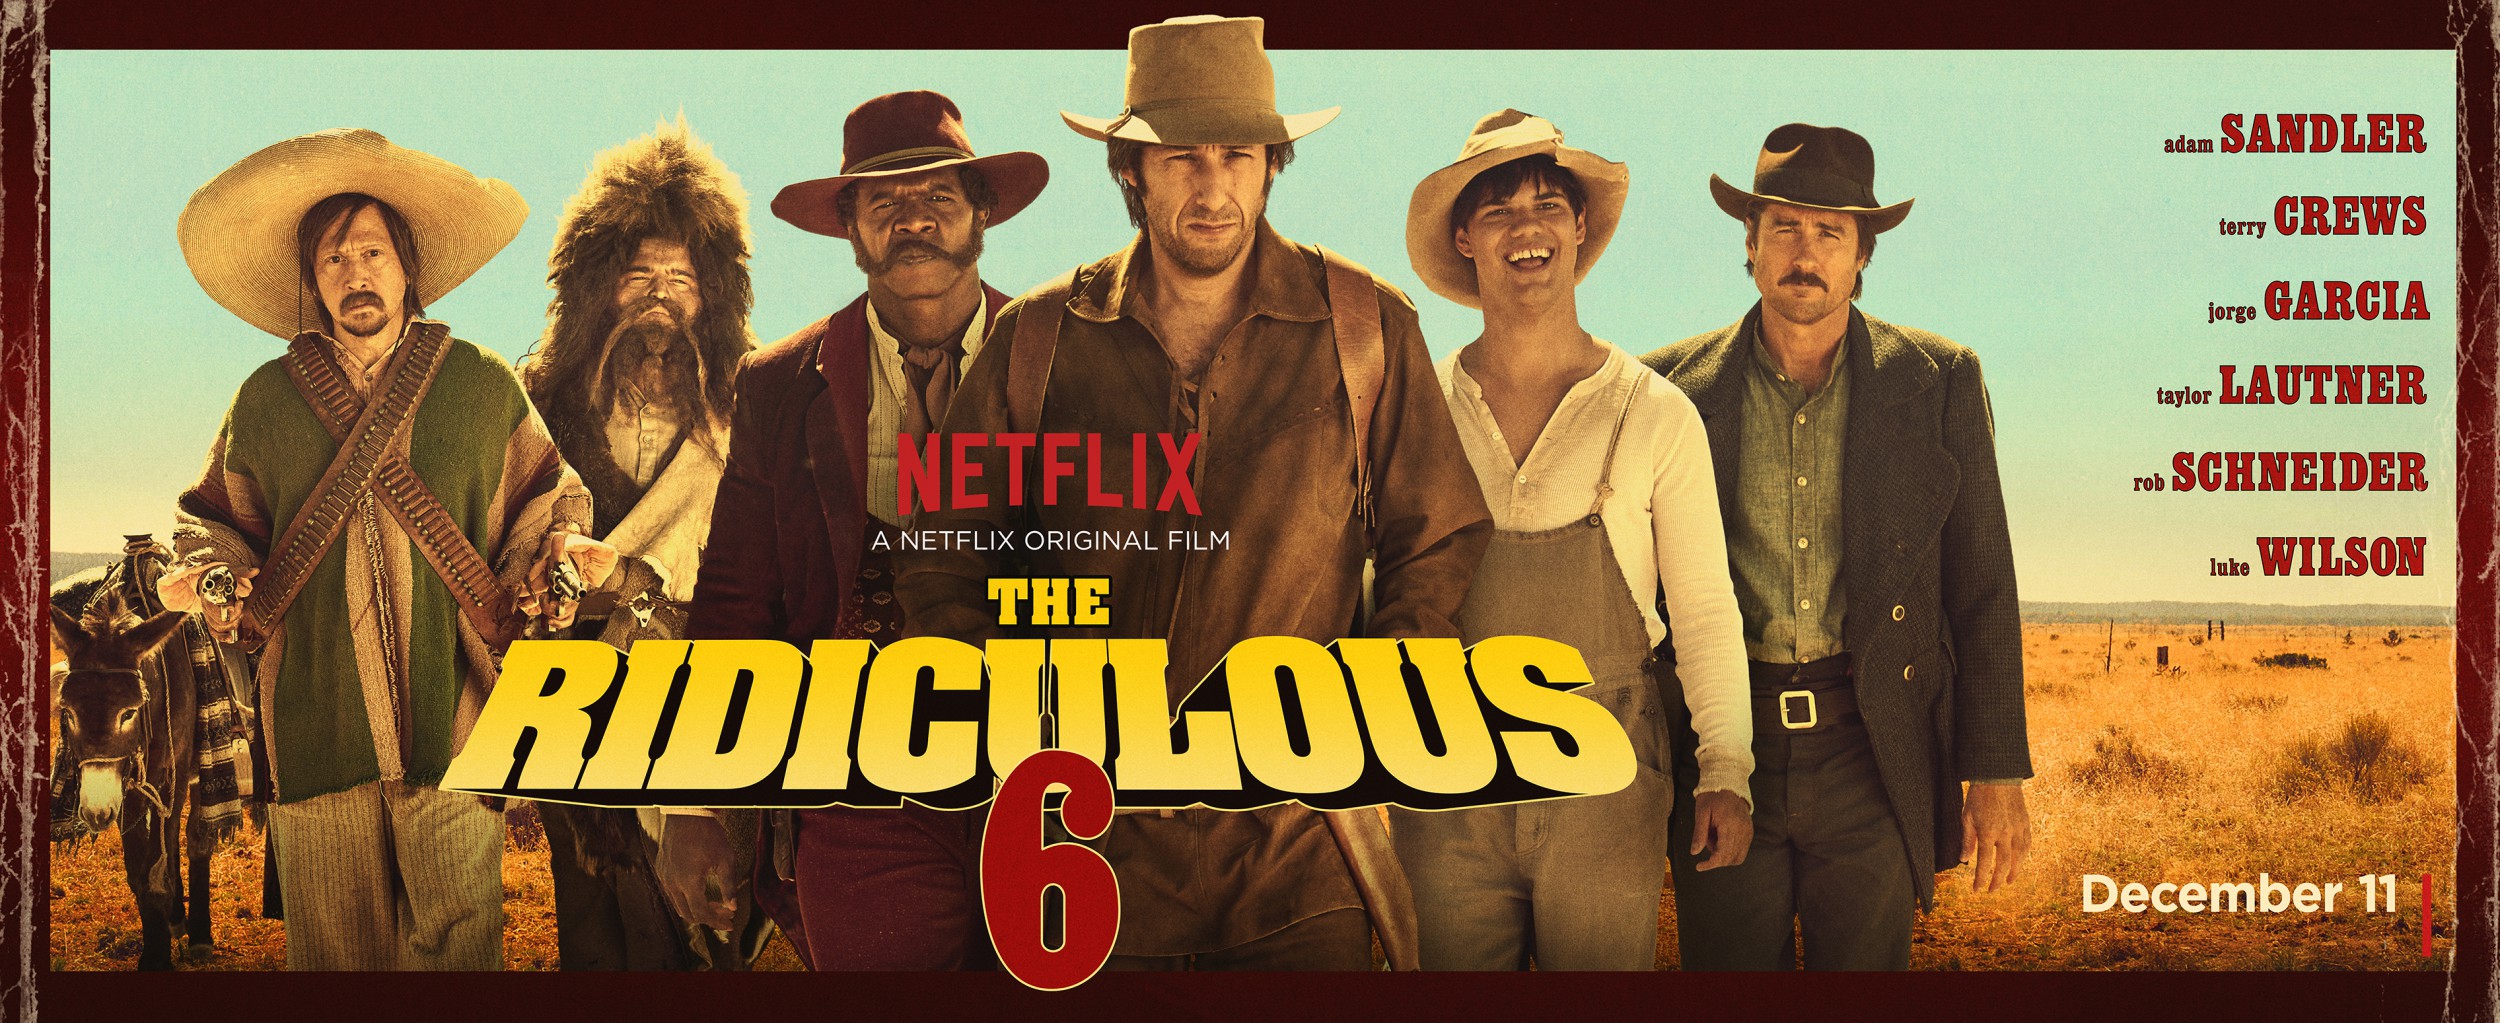 Mega Sized TV Poster Image for The Ridiculous 6 (#2 of 2)